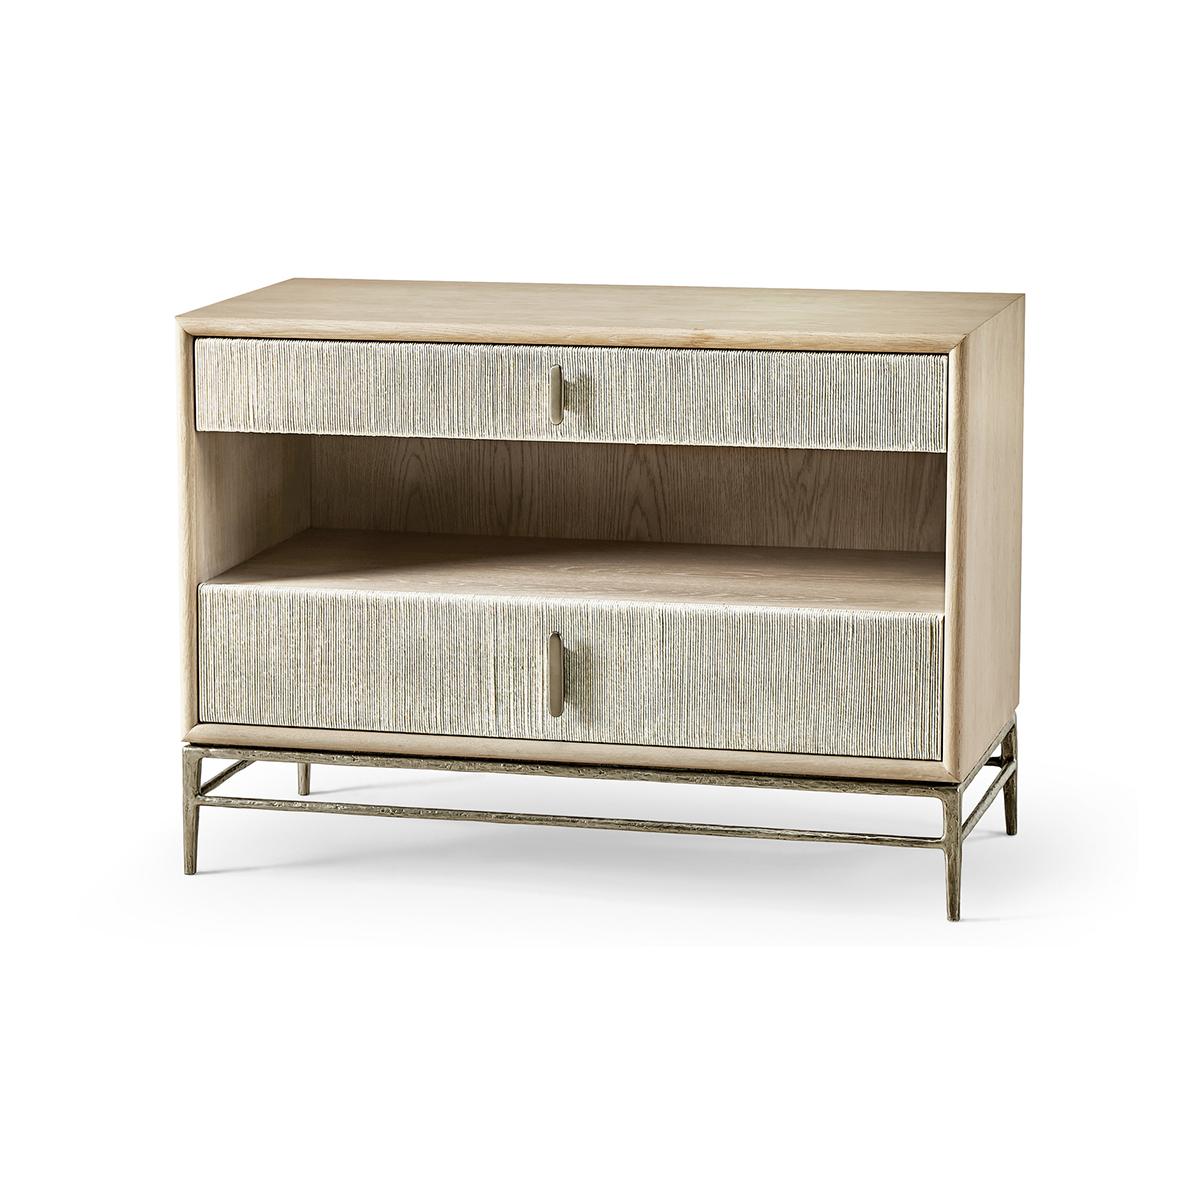 replete with two Danish cord-wrapped drawer fronts adding style to the classic tone and feel of contemporary vision without shortcuts. A cast stainless steel base and hand-cast vertical hardware are finished in elegant satin white brass for a